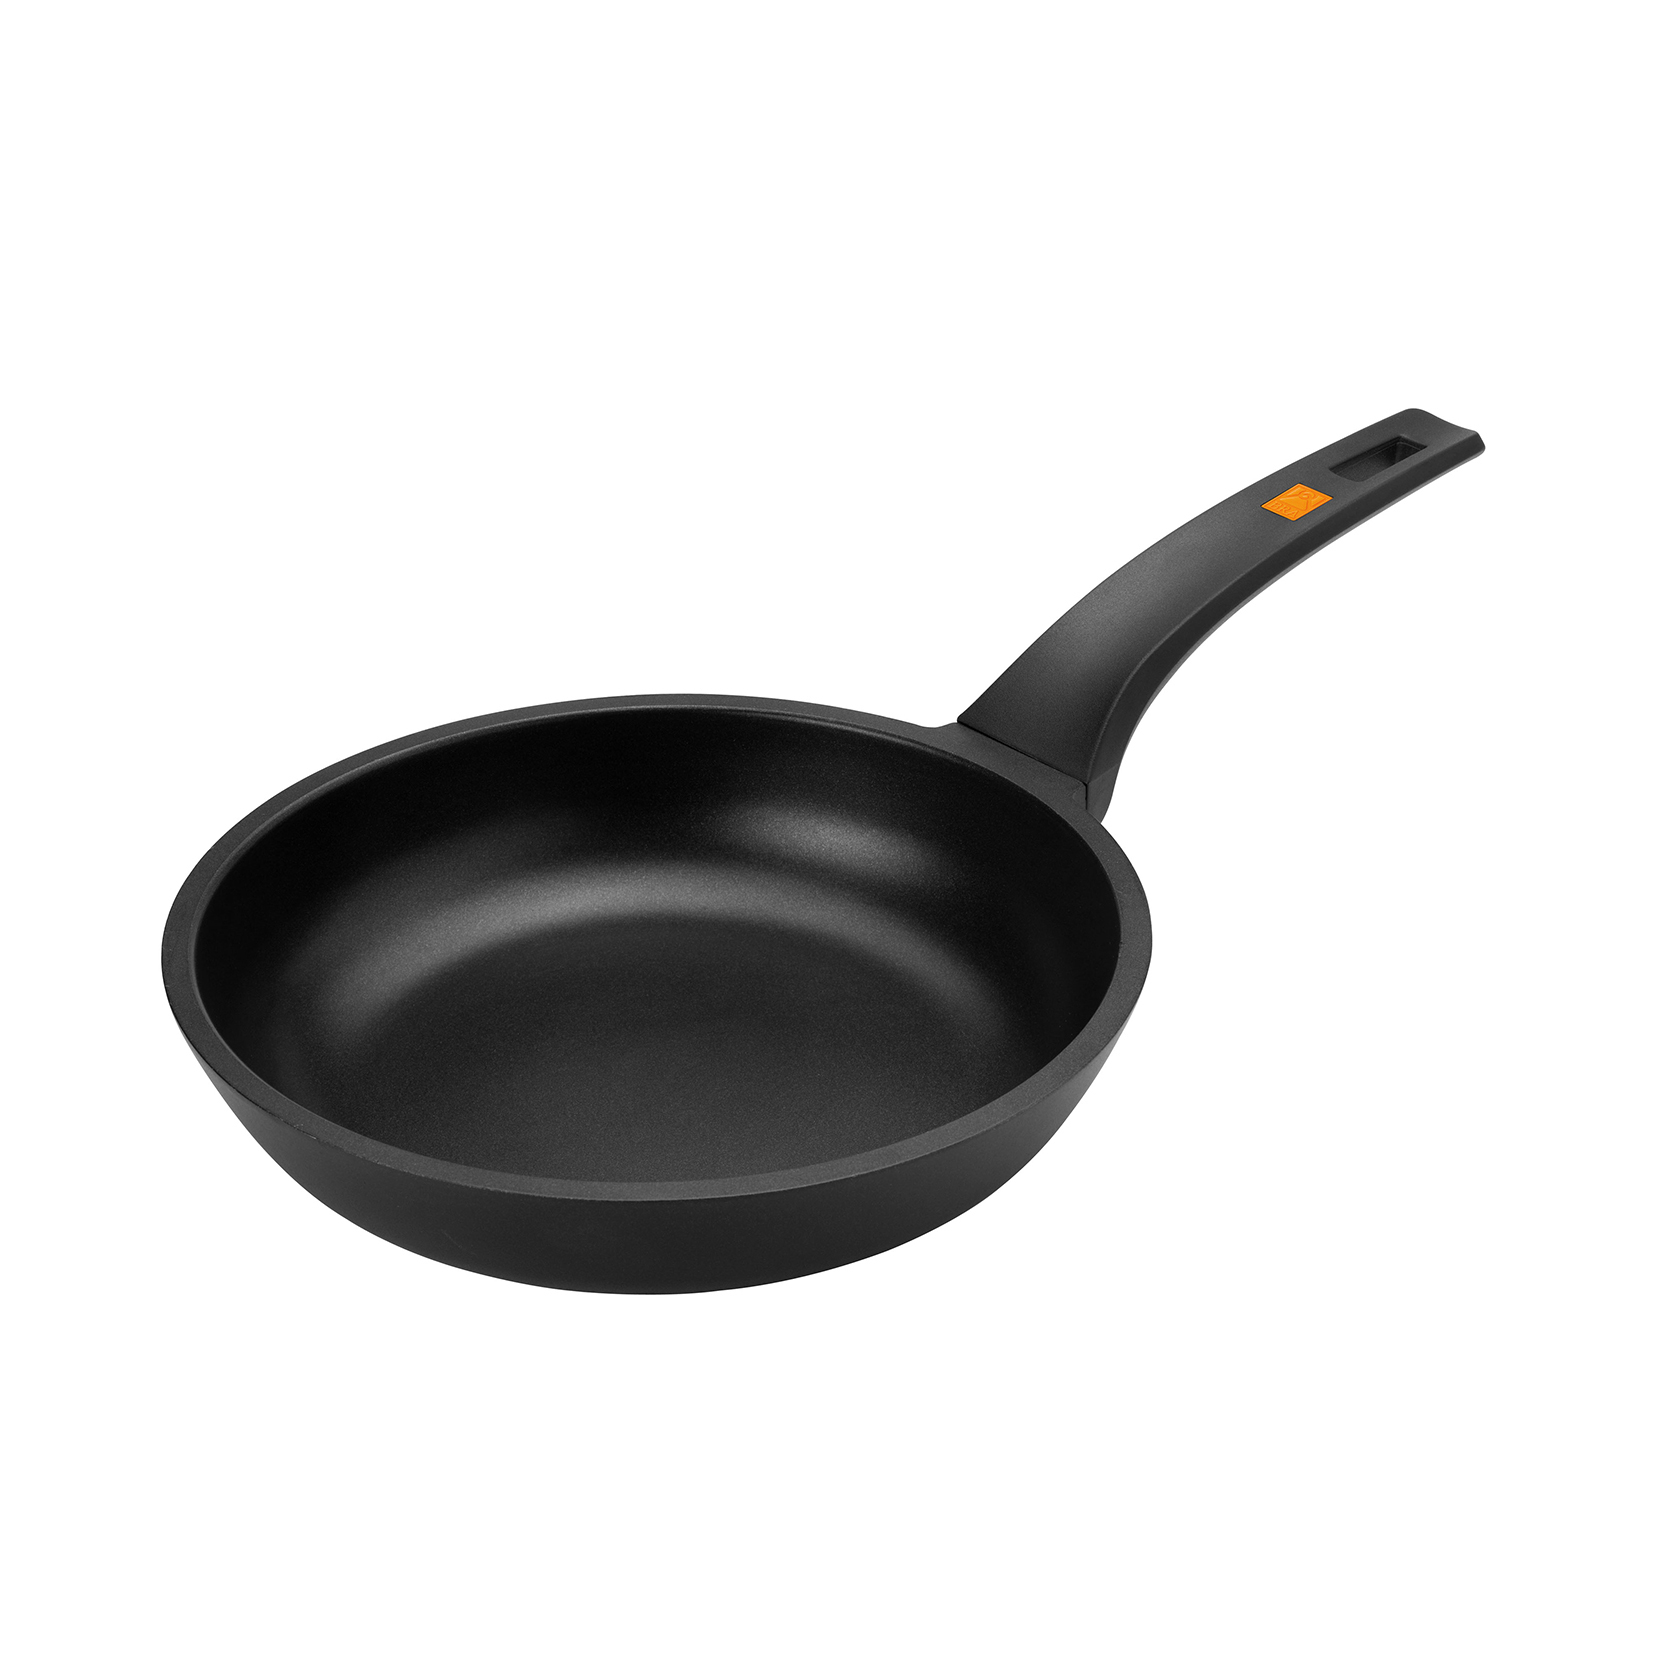 20 x 24x 28 cm BRA Advanced Set of 3 Frying Pans Aluminium and Bakelite All Cookers Including Induction Black 